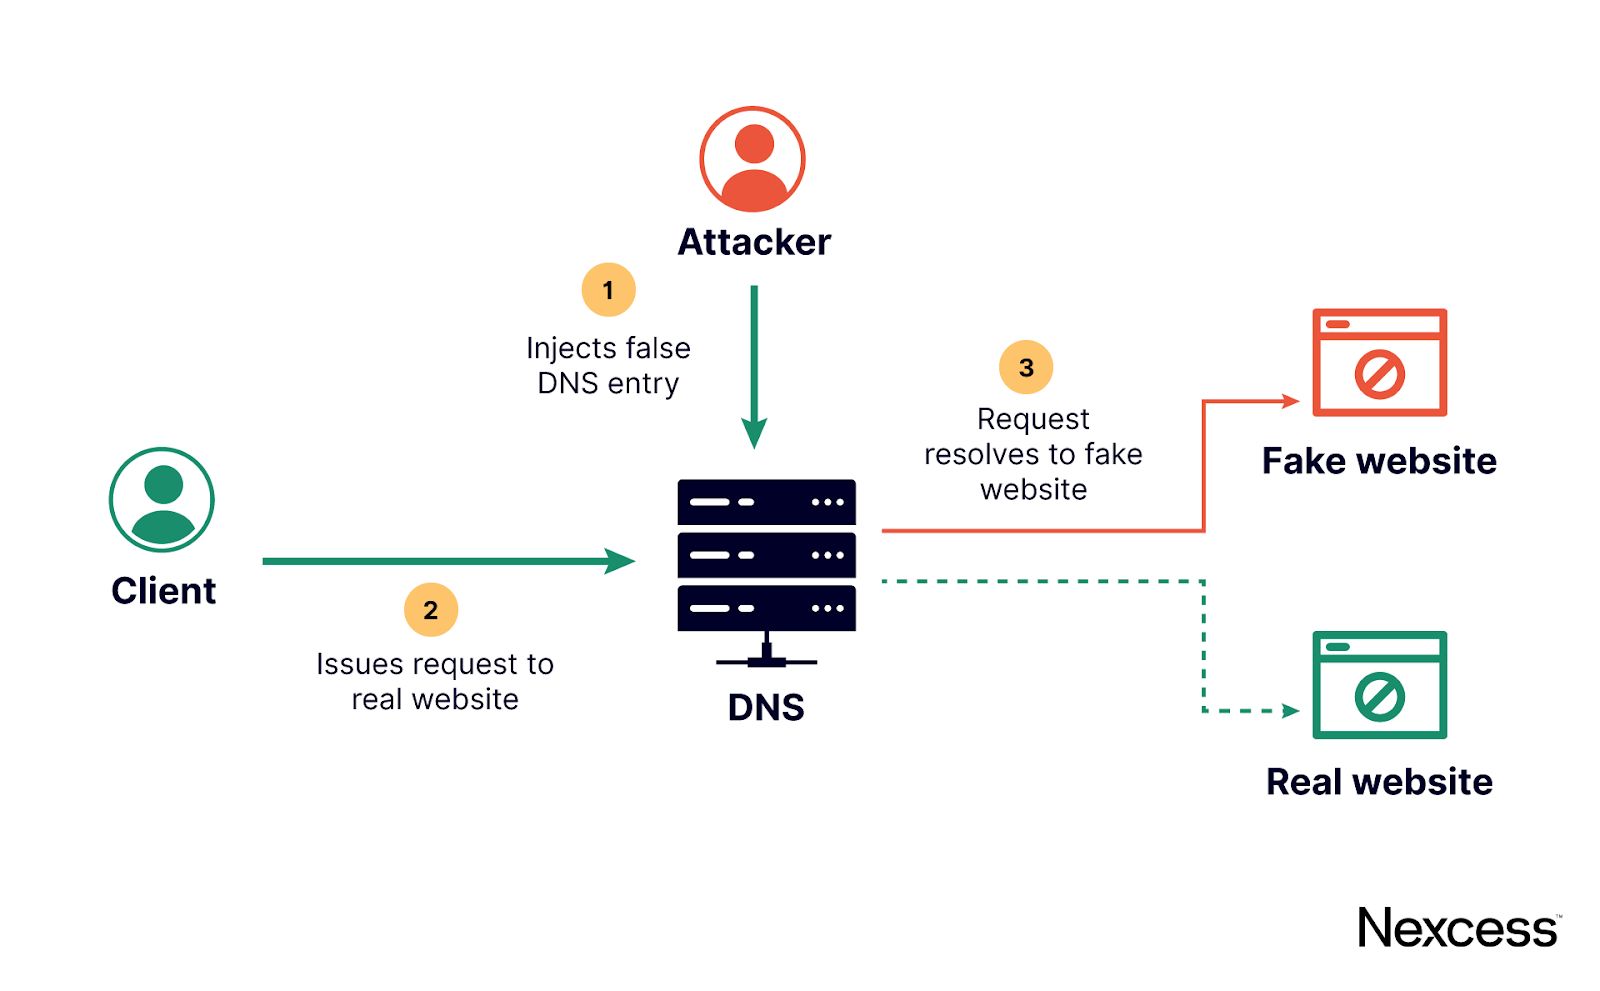 A cyber attacker can “spoof” or hijack your DNS with a fake entry and redirect traffic to a fraudulent website.